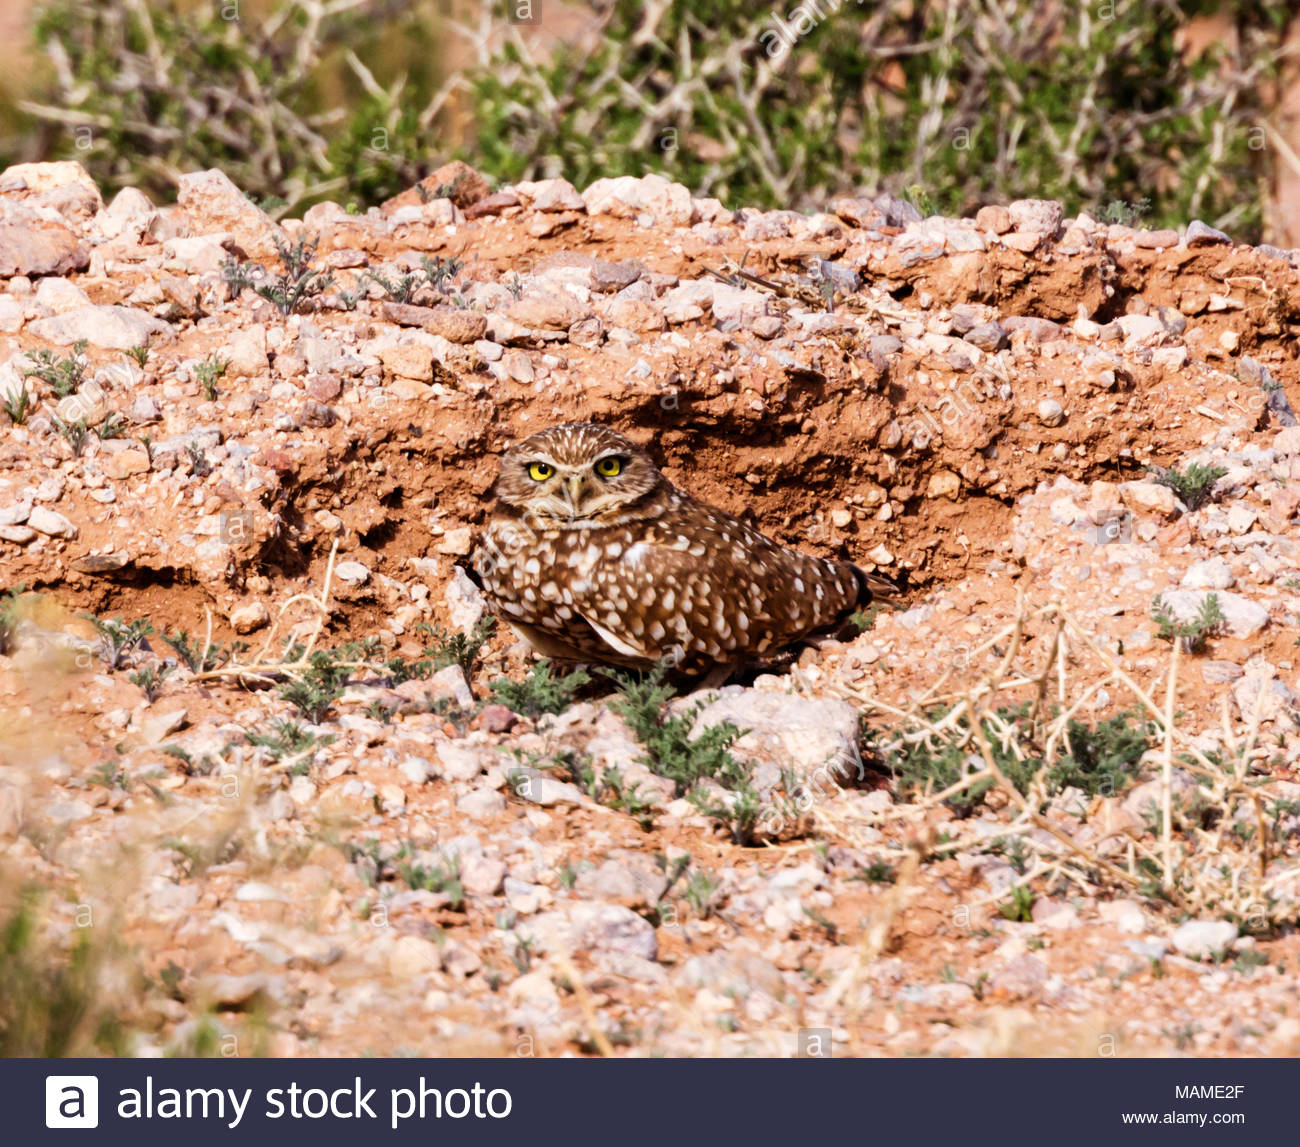 burrowing-owl-athene-cunicularia-standing-in-front-of-burrow-new-mexico-usa-MAME2F.jpg